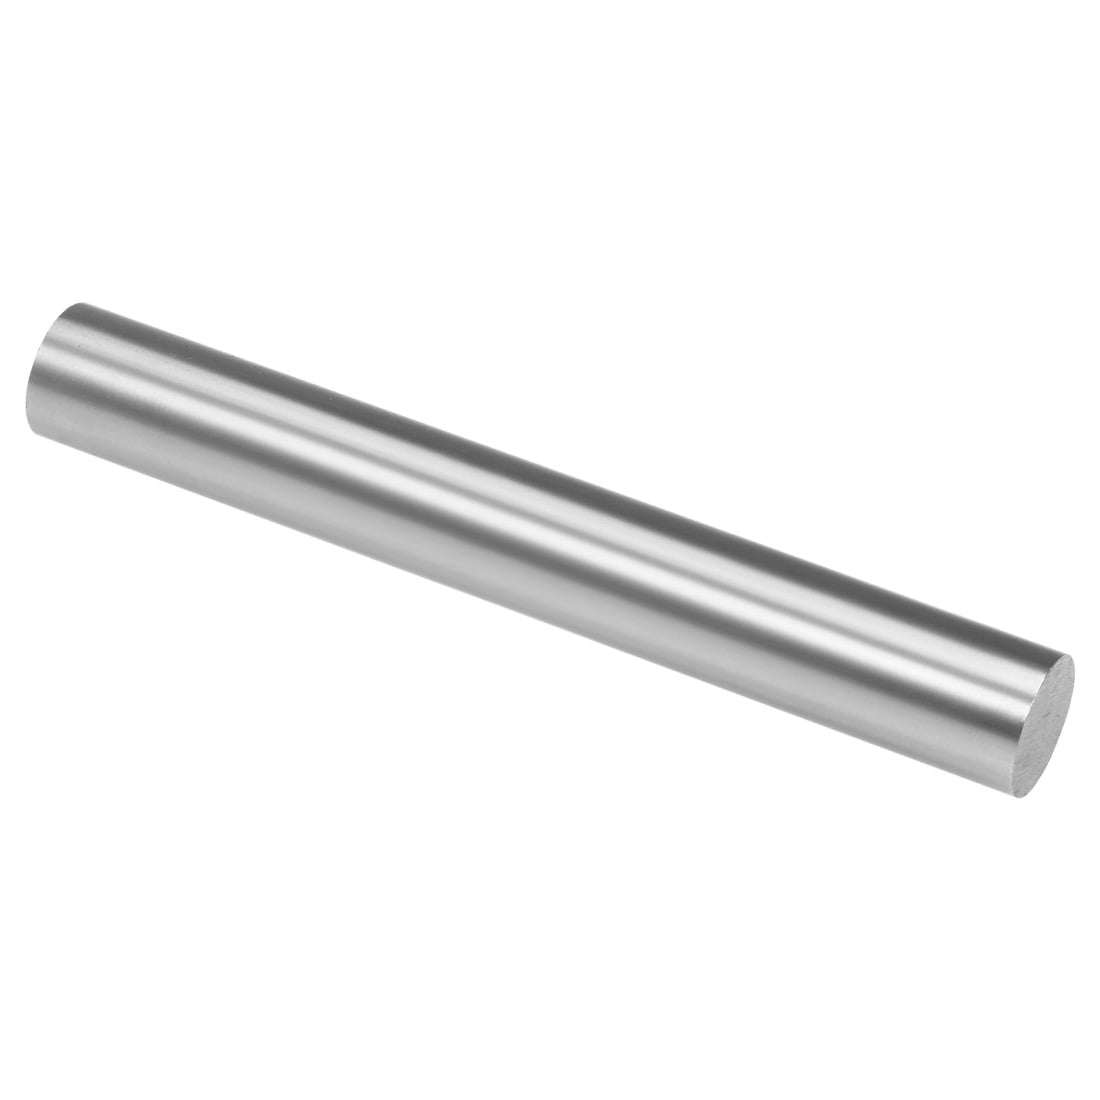 Details about   Dia 3-20mm HSS Steel Round Rod Bar 150mm Length Axis Metal Shaft Metalworking US 